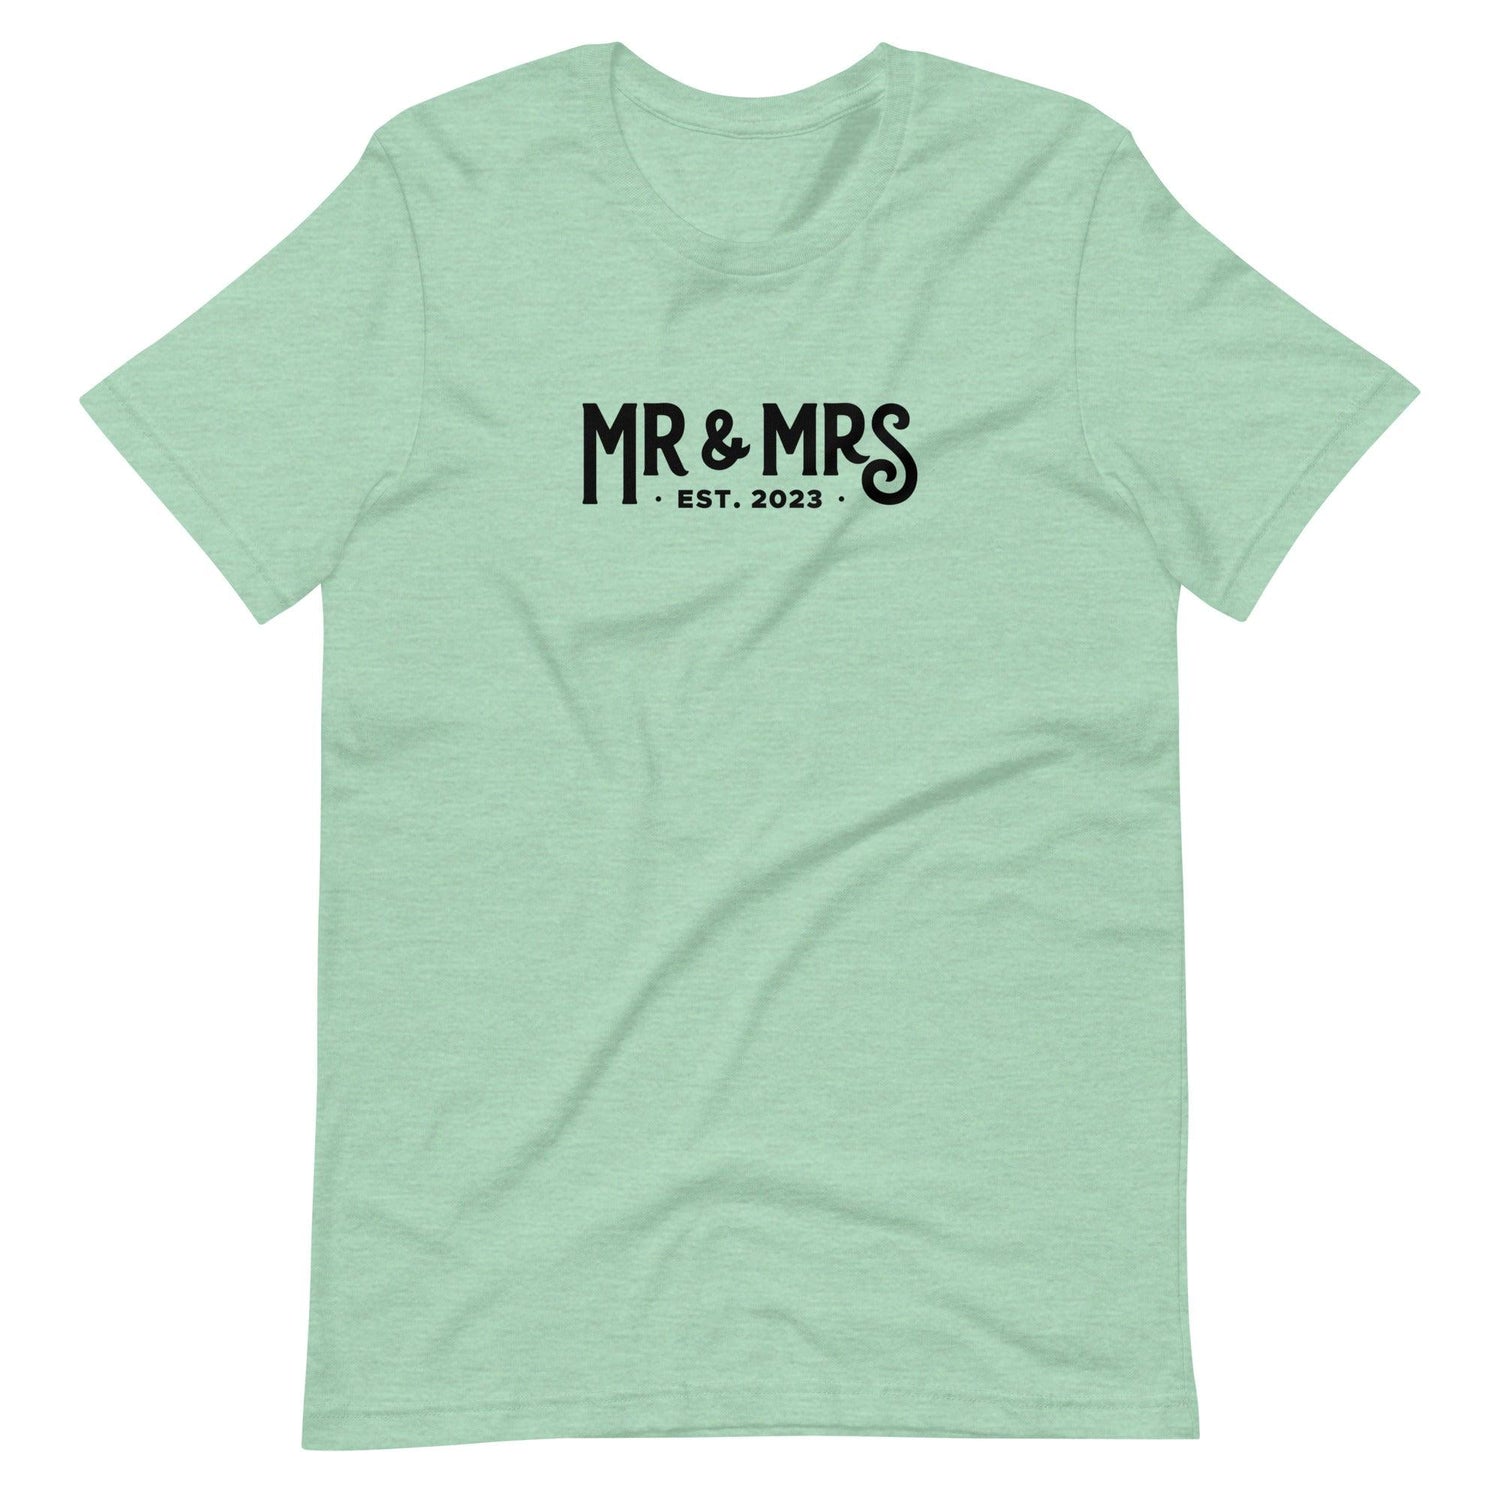 Mr and Mrs Established 2023 Unisex t-shirt - Engagement Gift for Couple by Oaklynn Lane